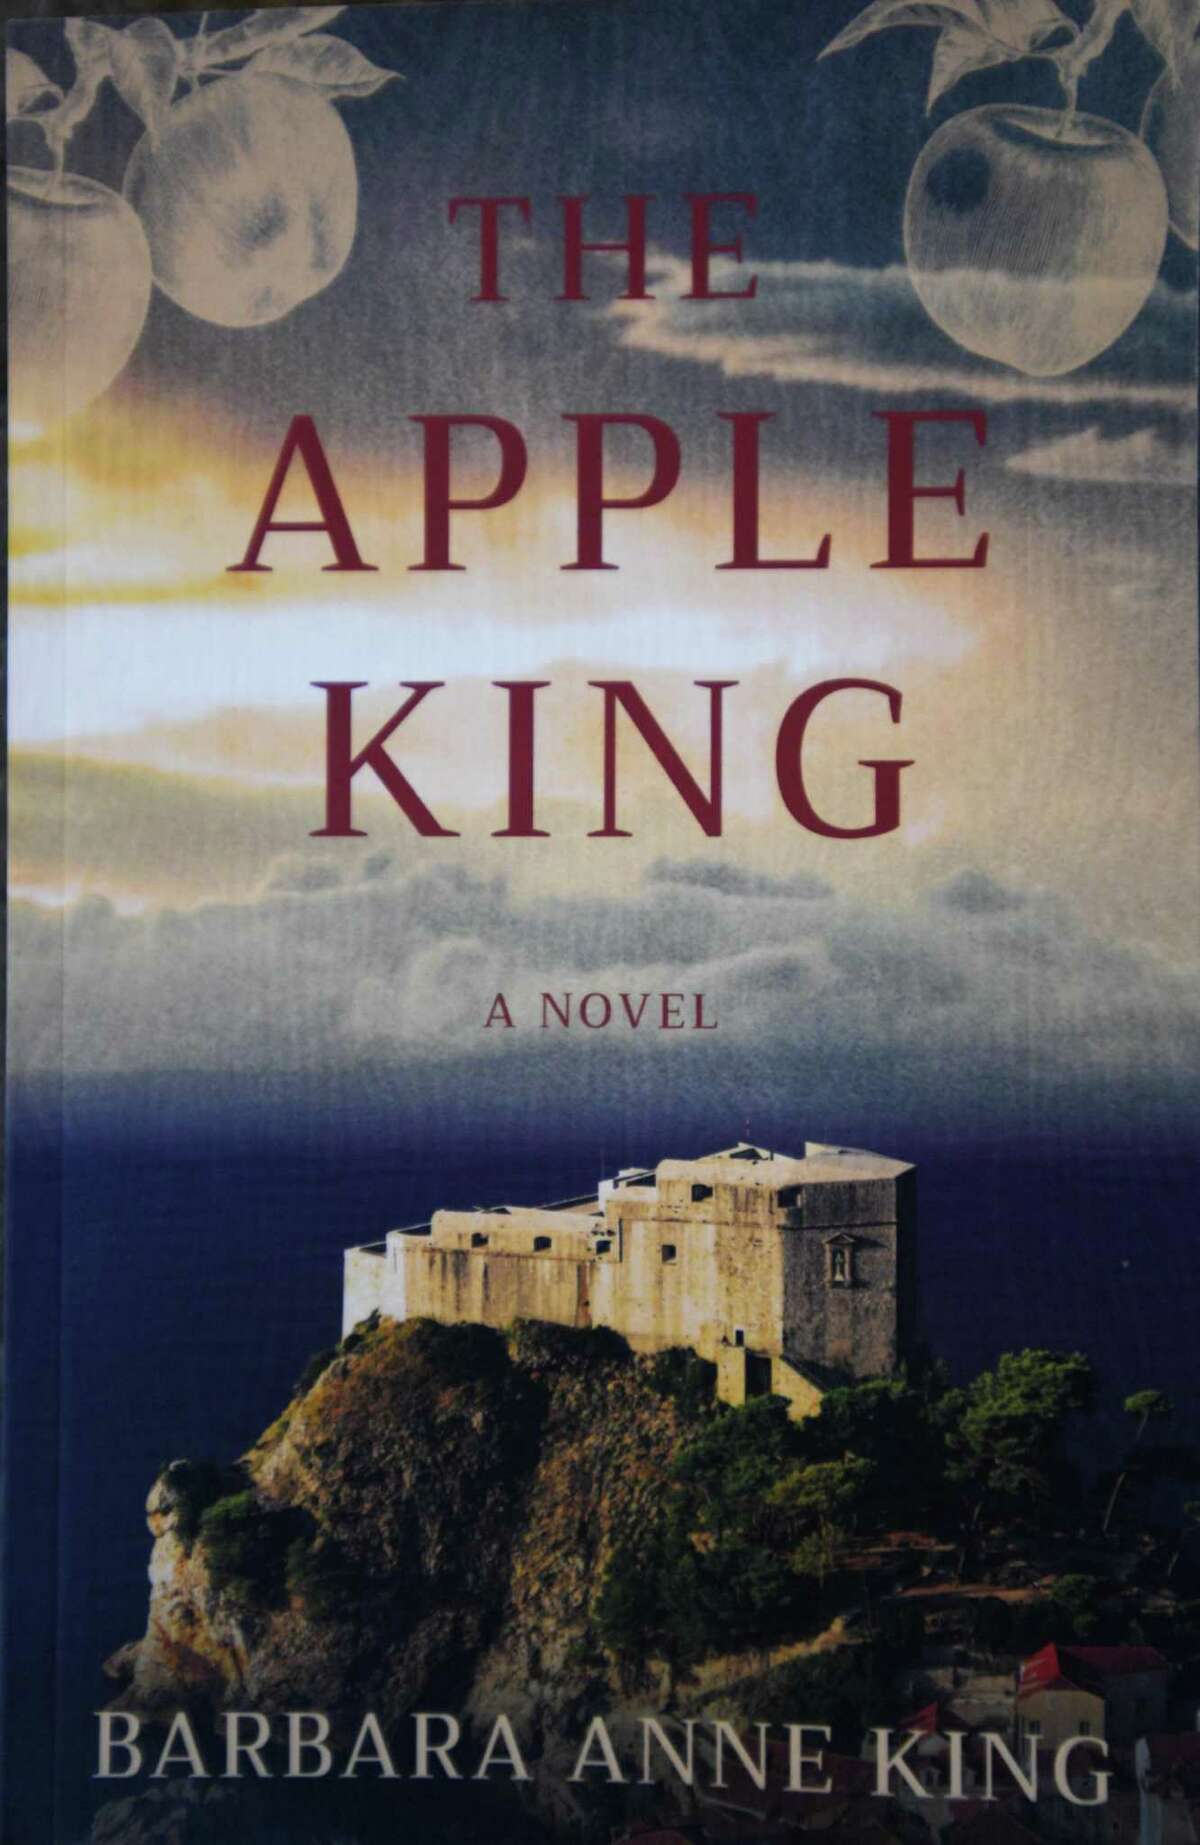 Weston author Barbara Anne King's novel, The Apple King, winner of the CT Author Project Award for adult fiction, in Westport, Conn. on Wednesday, December 1, 2021.